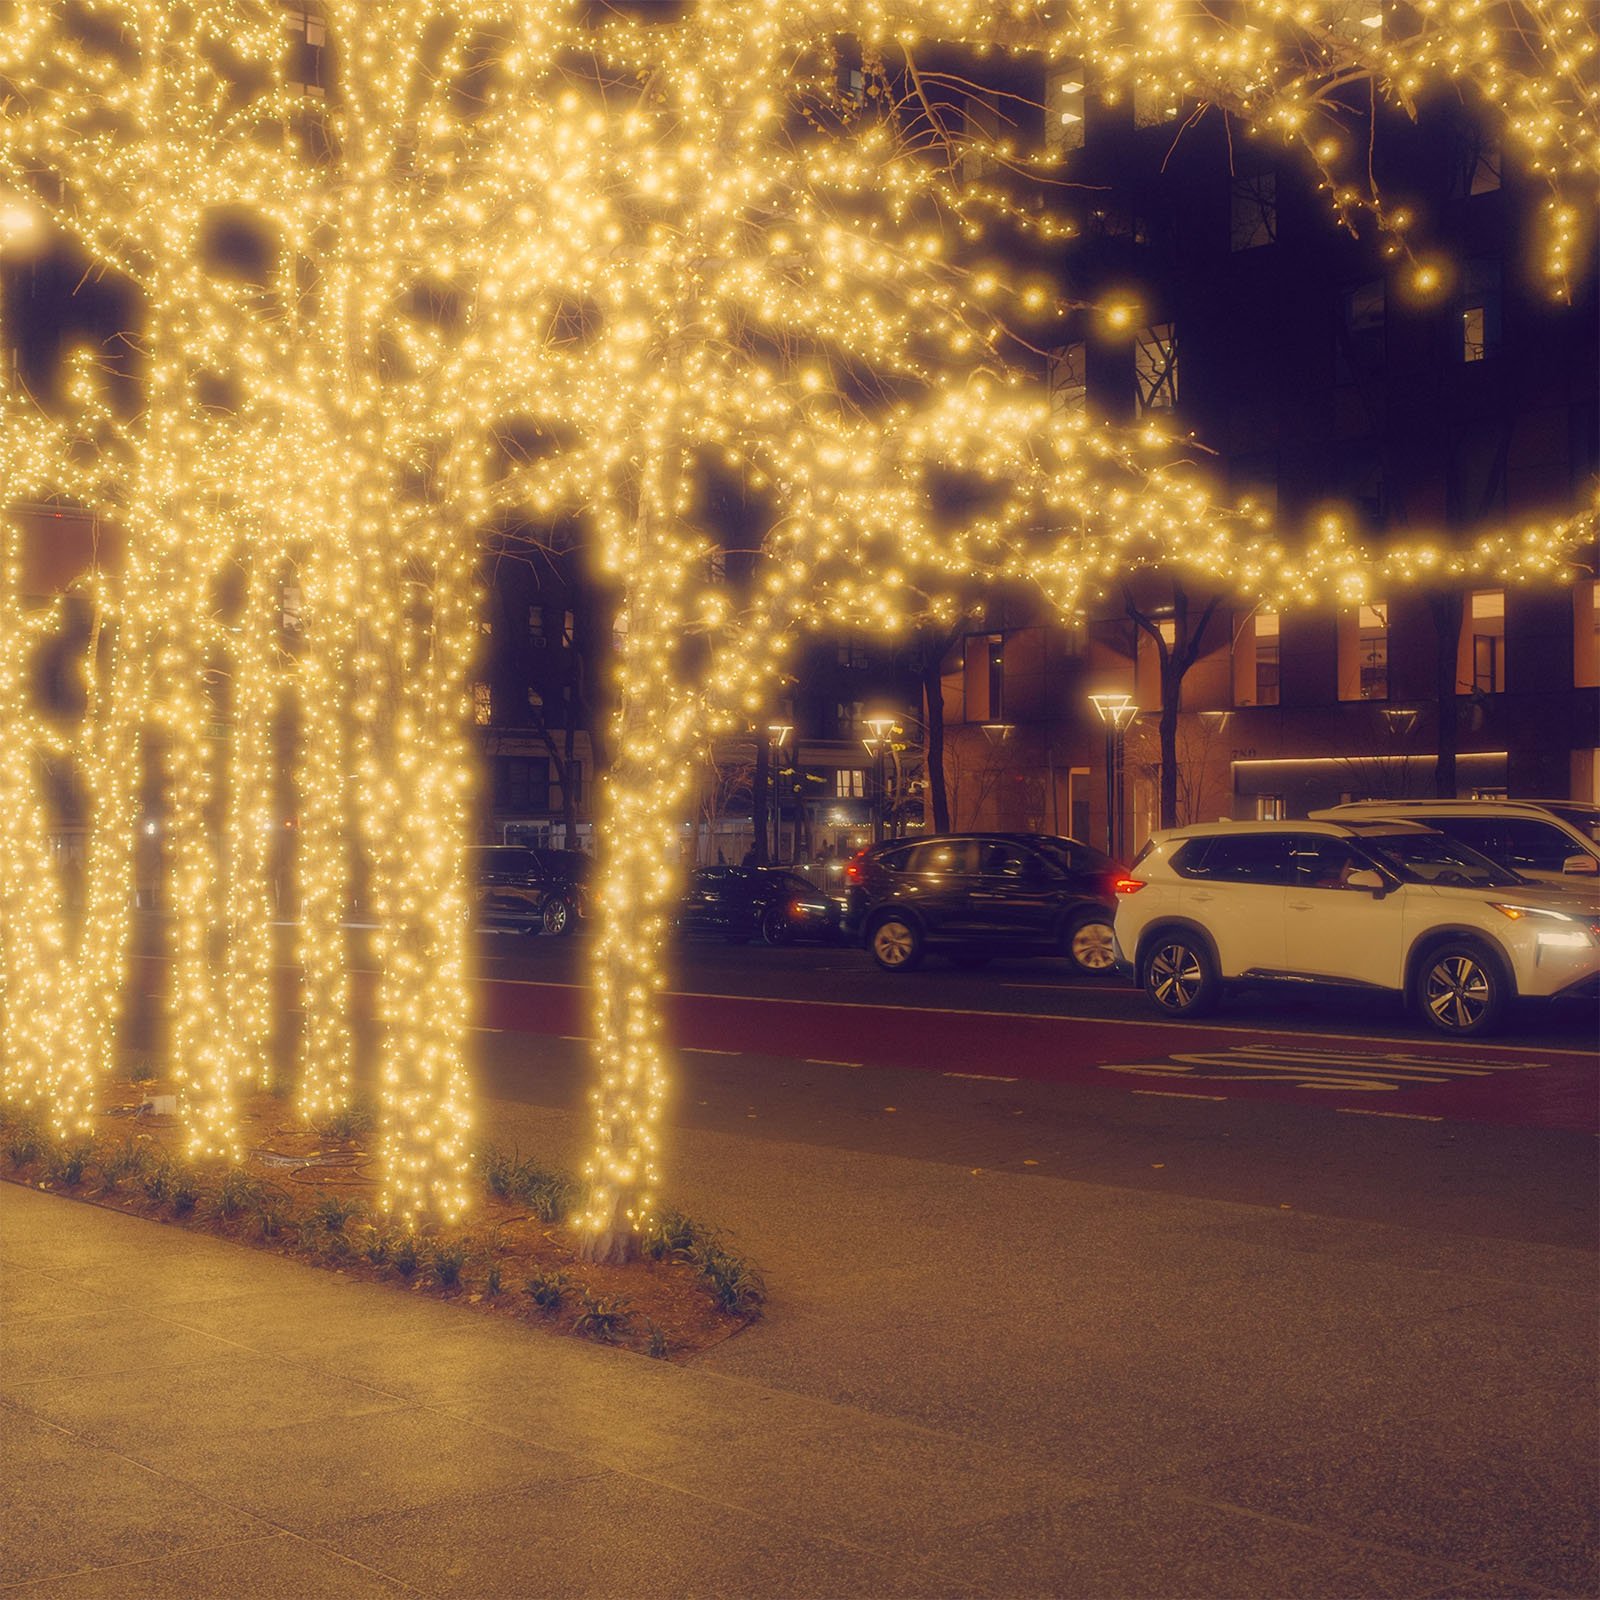 A nighttime street scene with trees wrapped in bright, twinkling fairy lights. Cars are parked along the street, with a few driving by. The warm glow of the lights creates a festive atmosphere against the darkened surroundings.